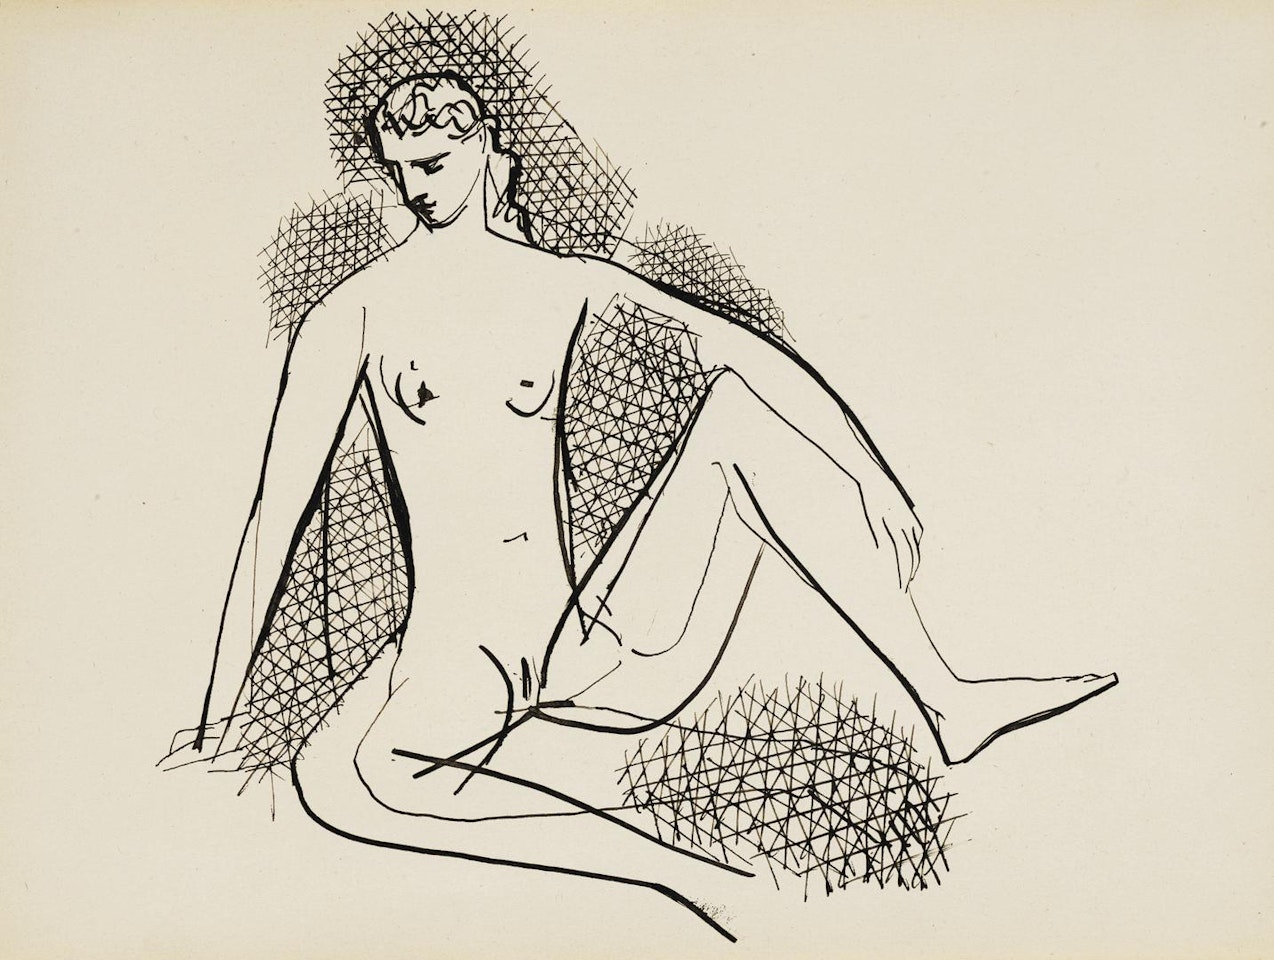 NU FÉMININ ASSIS, FROM CARNET NO. 67 by Pablo Picasso